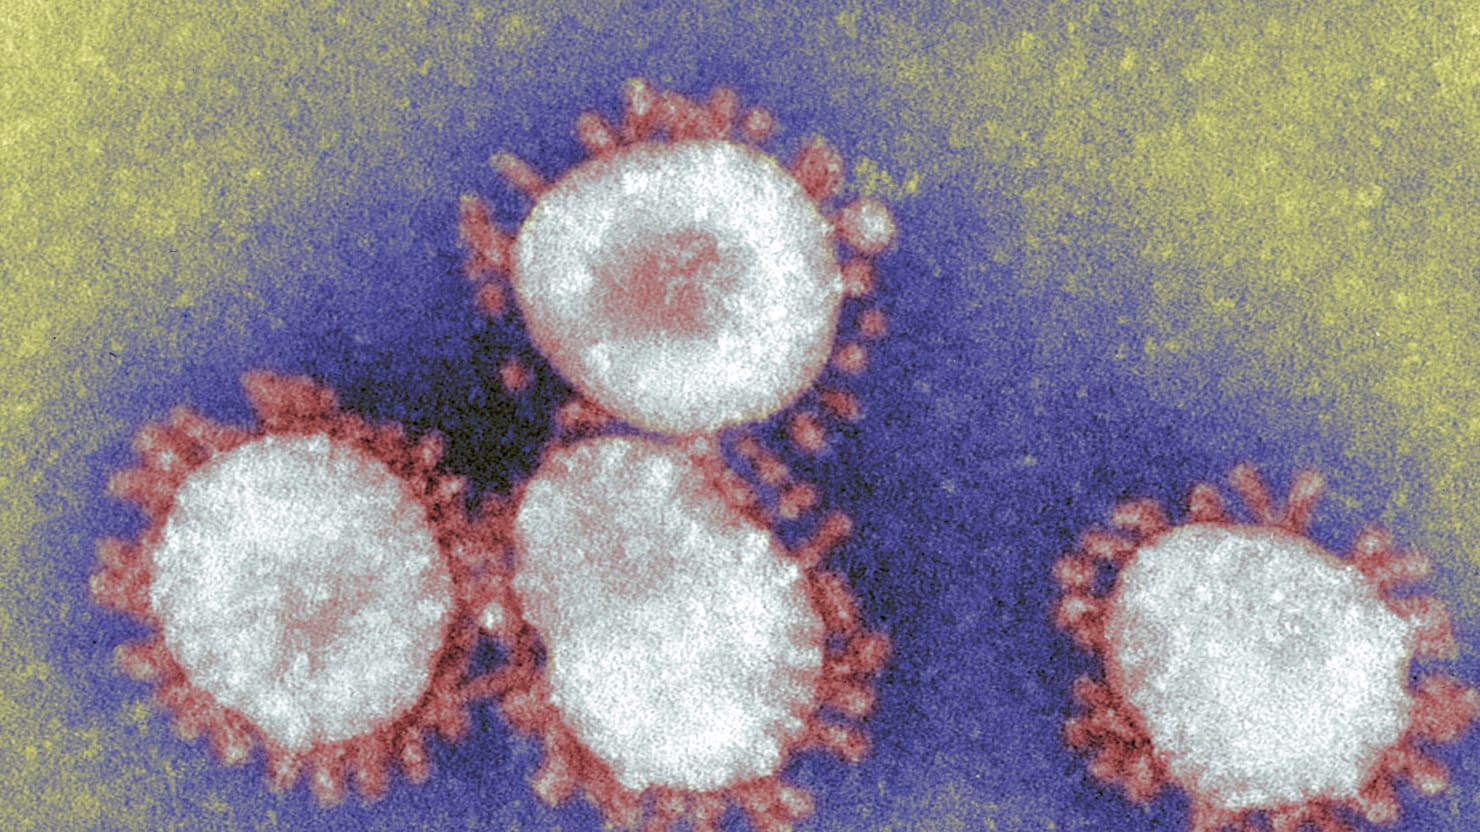 New Virus a 'Threat to the World'